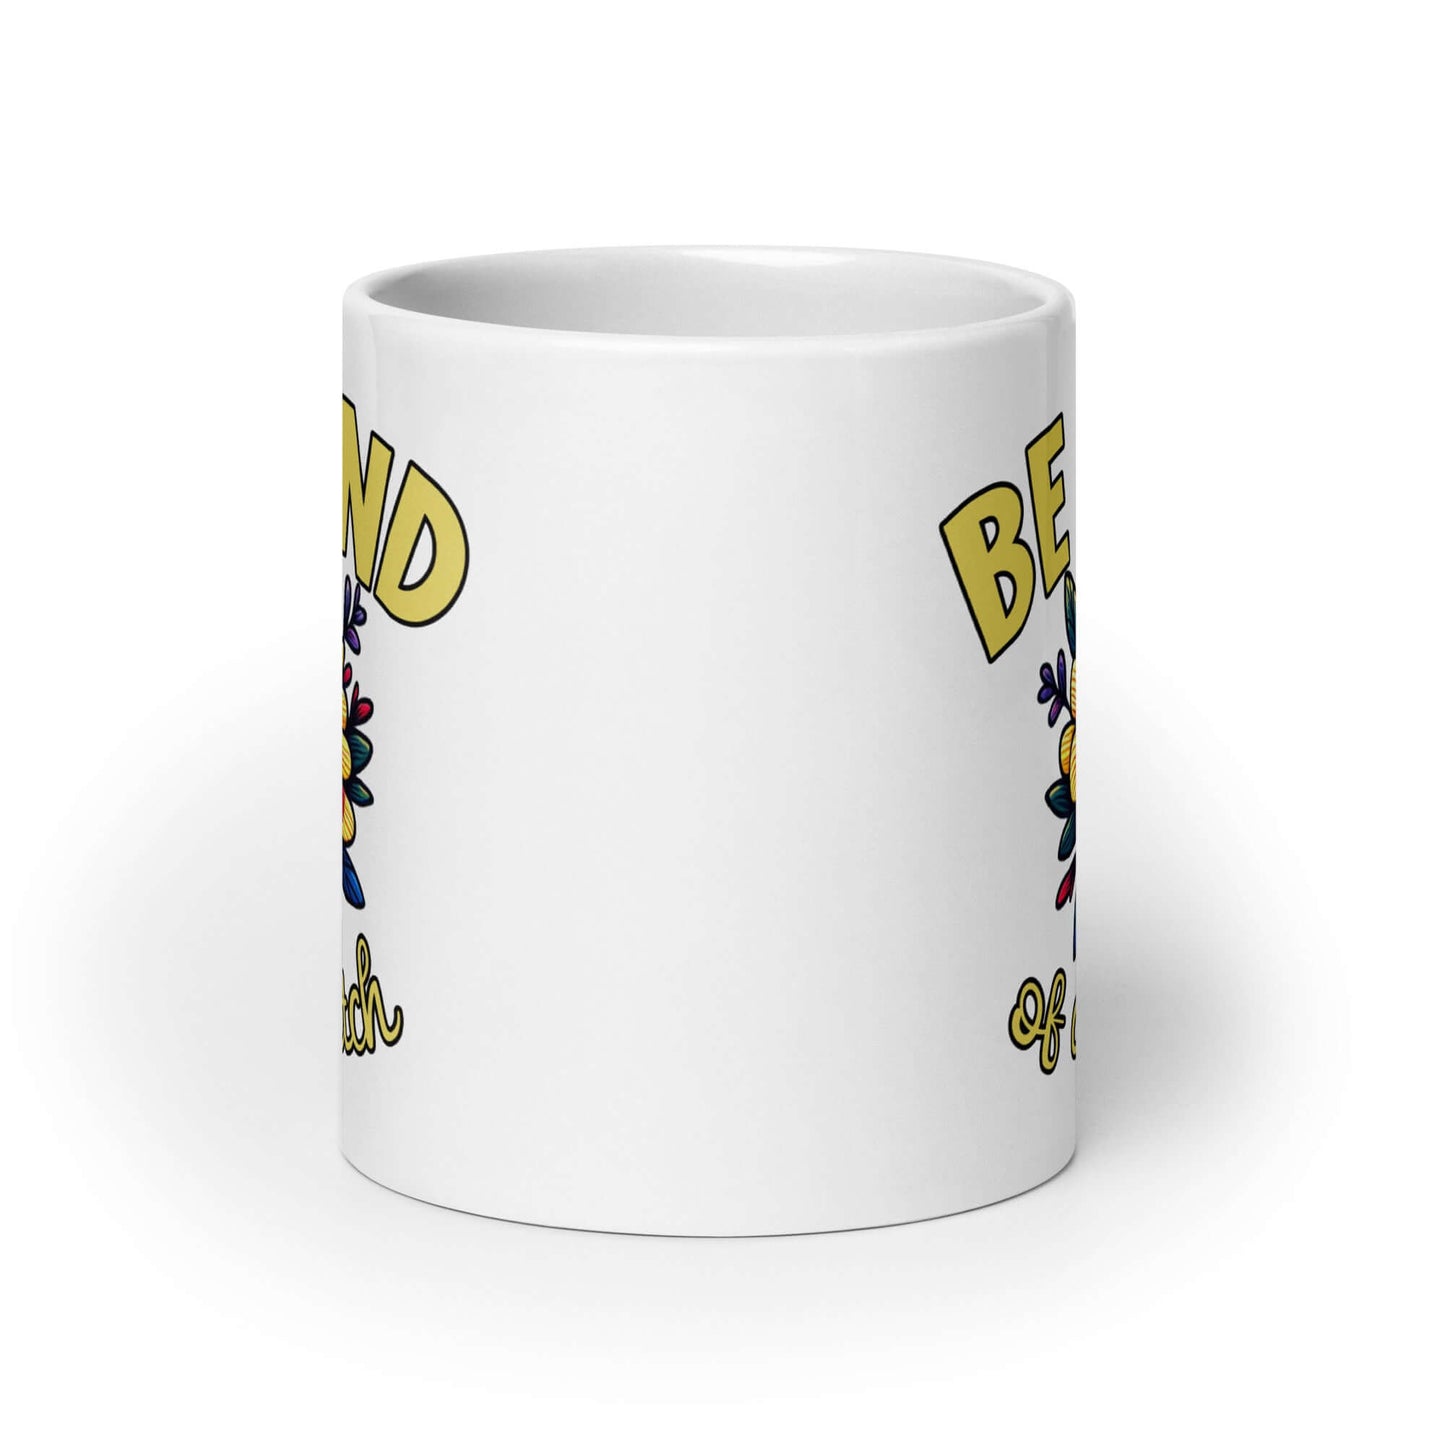 White ceramic coffee mug with an image of a flower and the words Be kind above the flower in bold block font. The words Of a bitch are smaller in script font under the flower. The design is printed on both sides of the mug.